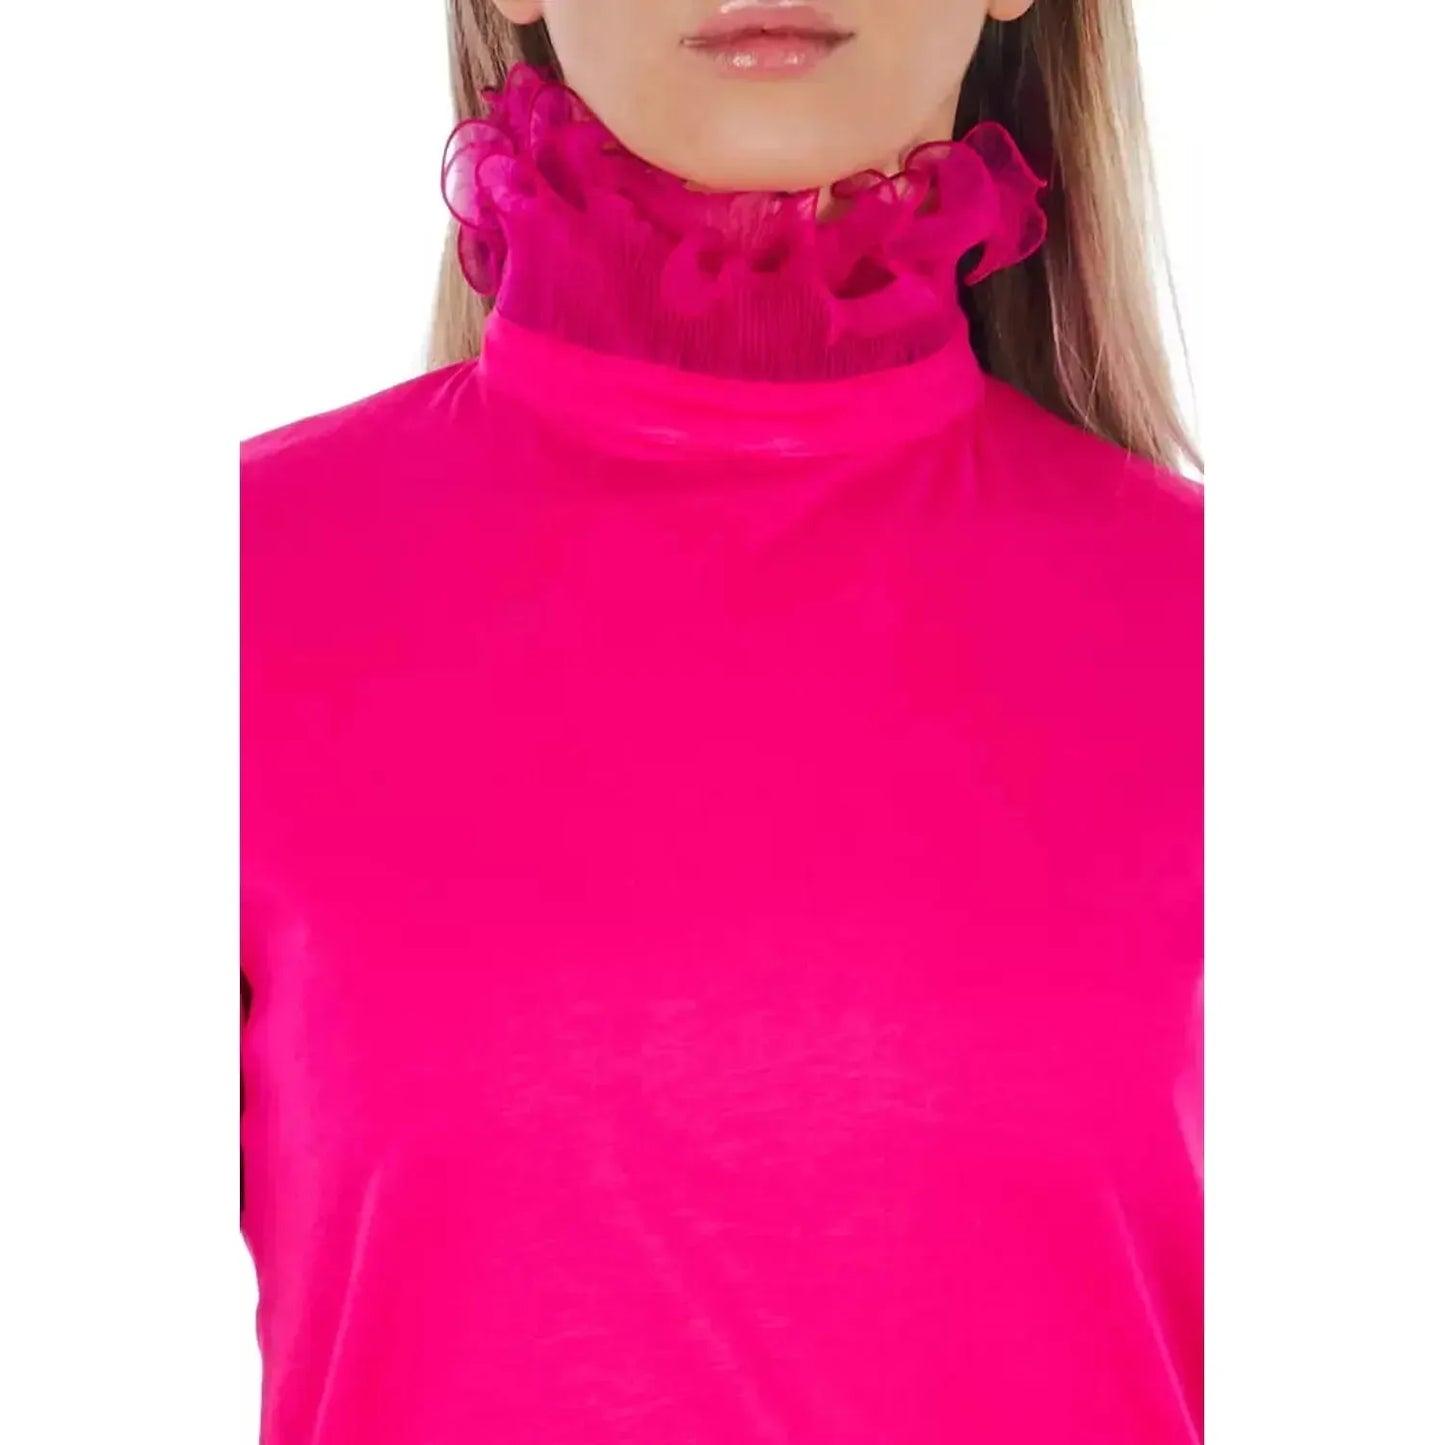 Frankie Morello Chic Pink Lace-Back High Neck Tee proseviolet-tops-t-shirt-2 stock_product_image_21717_1639927832-22-4e77383c-6dd.webp